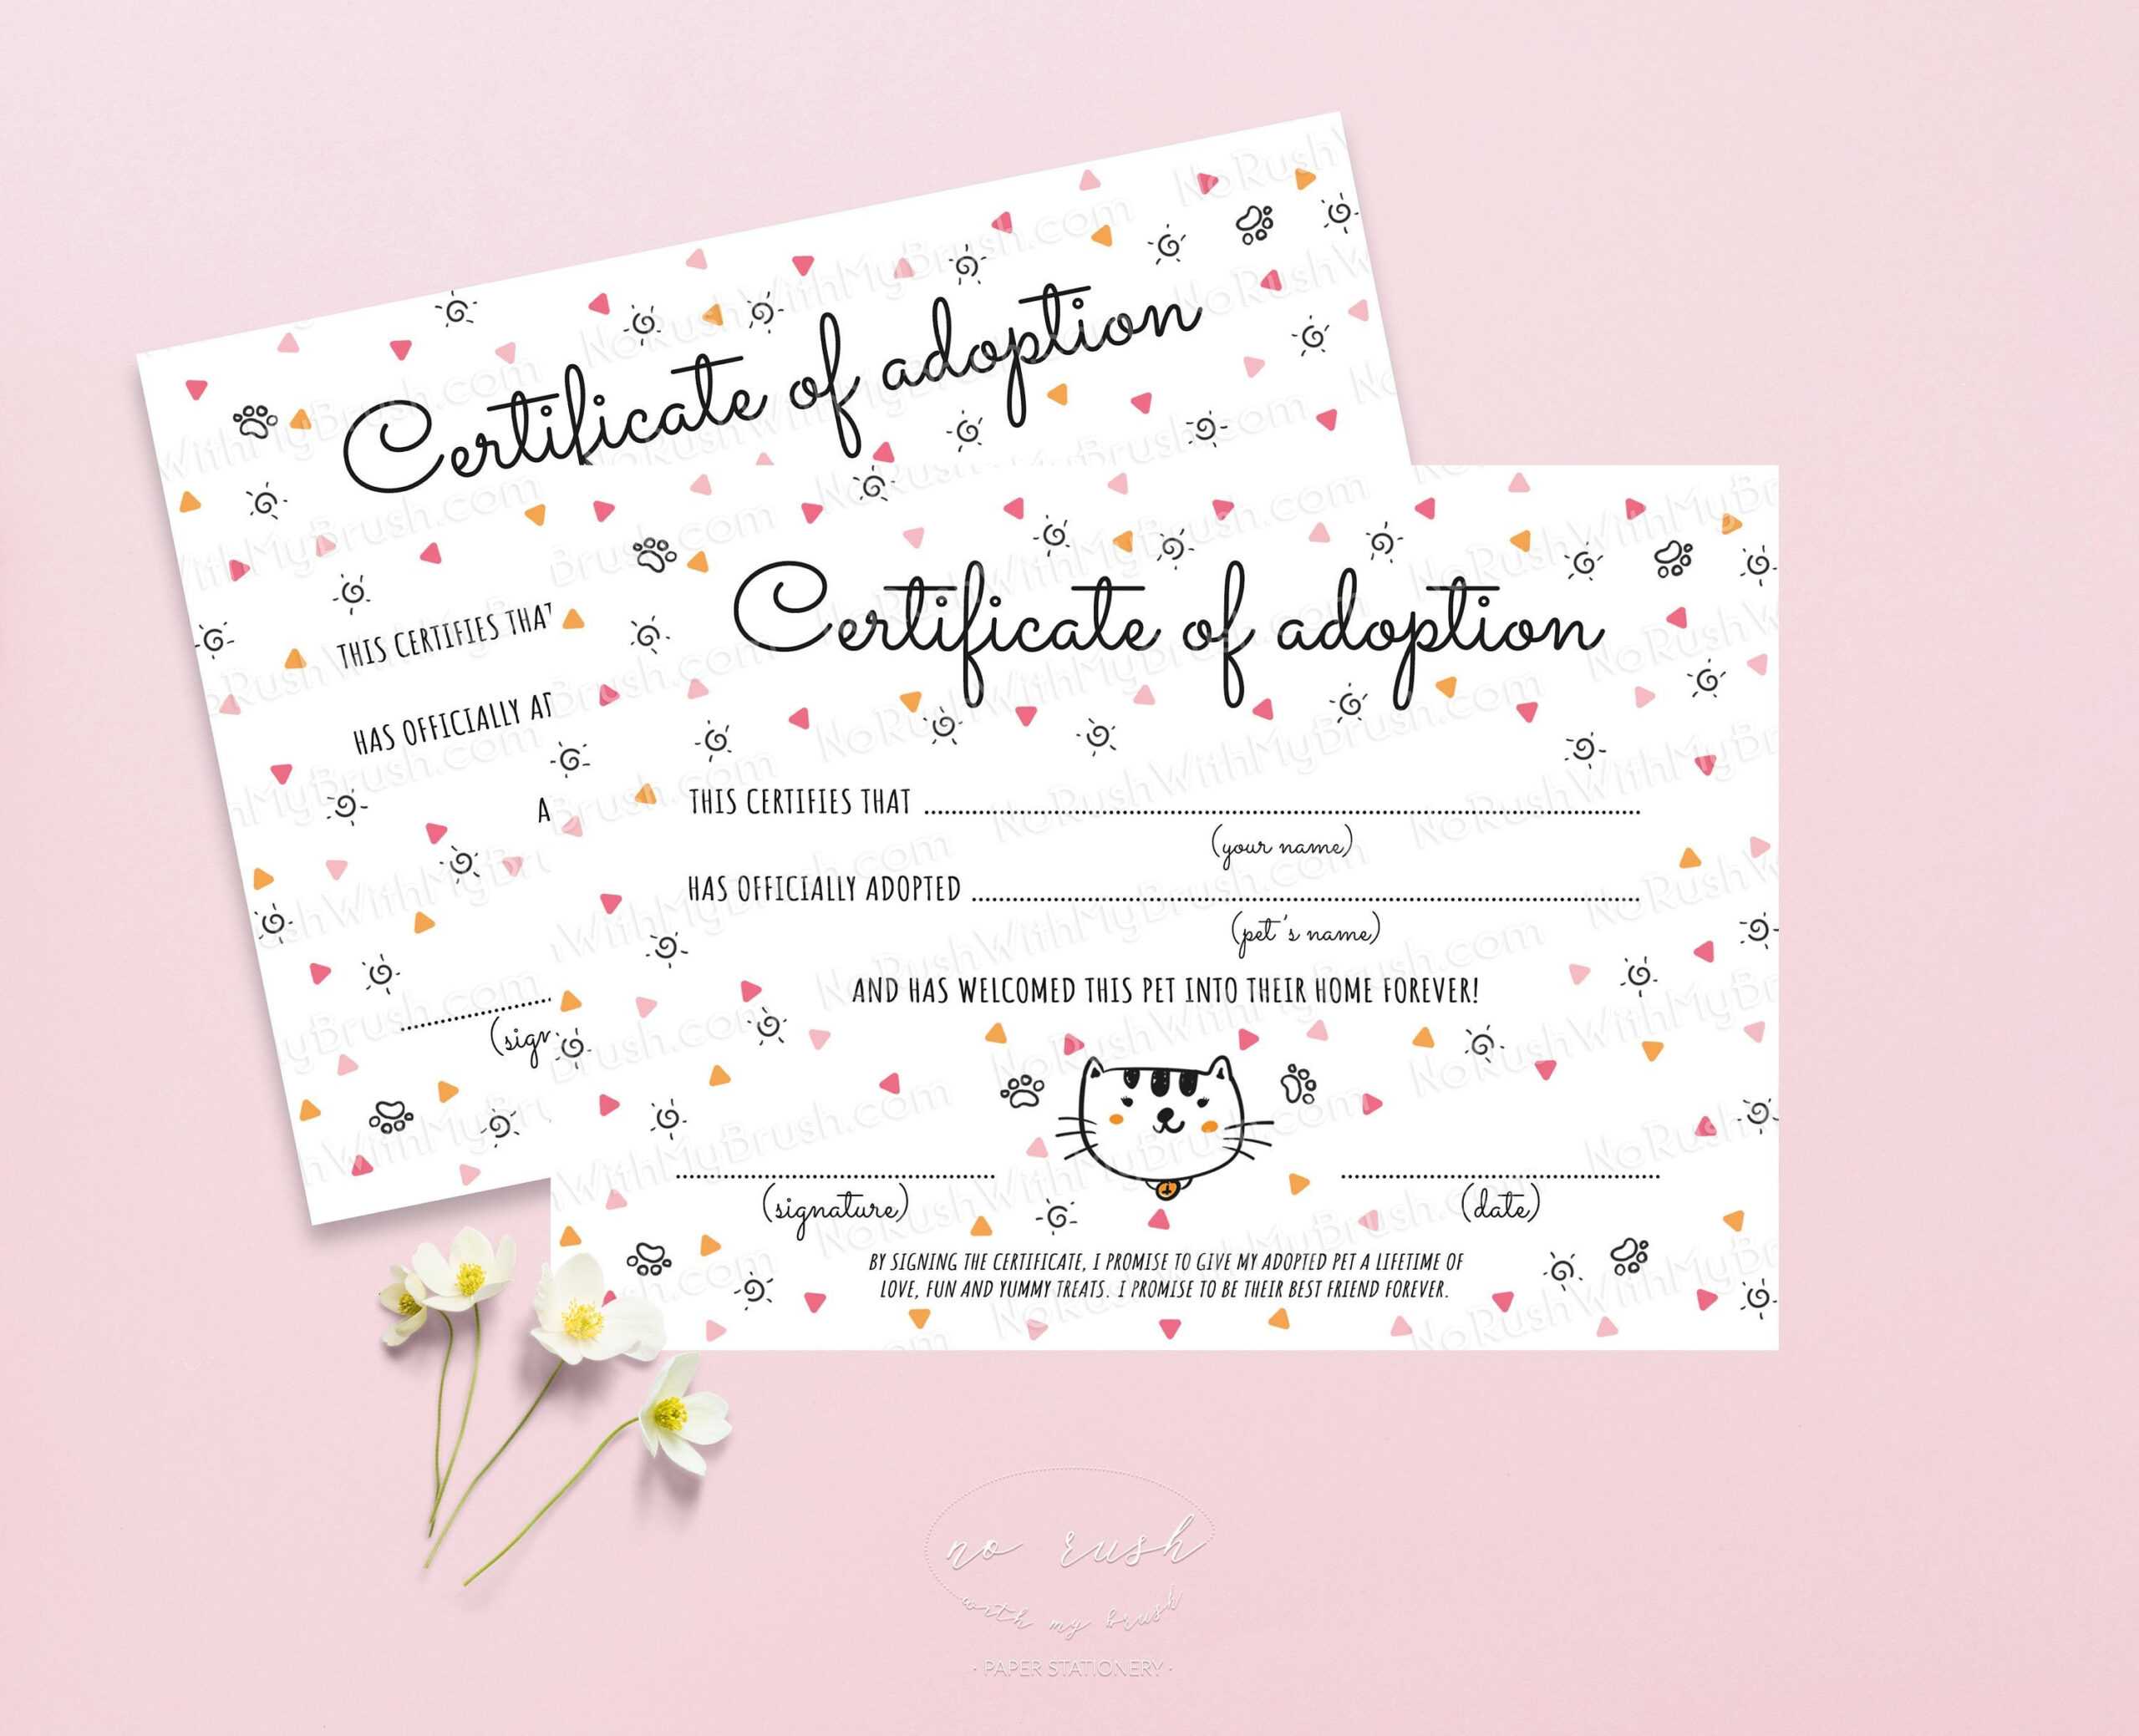 Fan Printable Adoption Certificate | Chavez Blog Intended For Toy Adoption Certificate Template